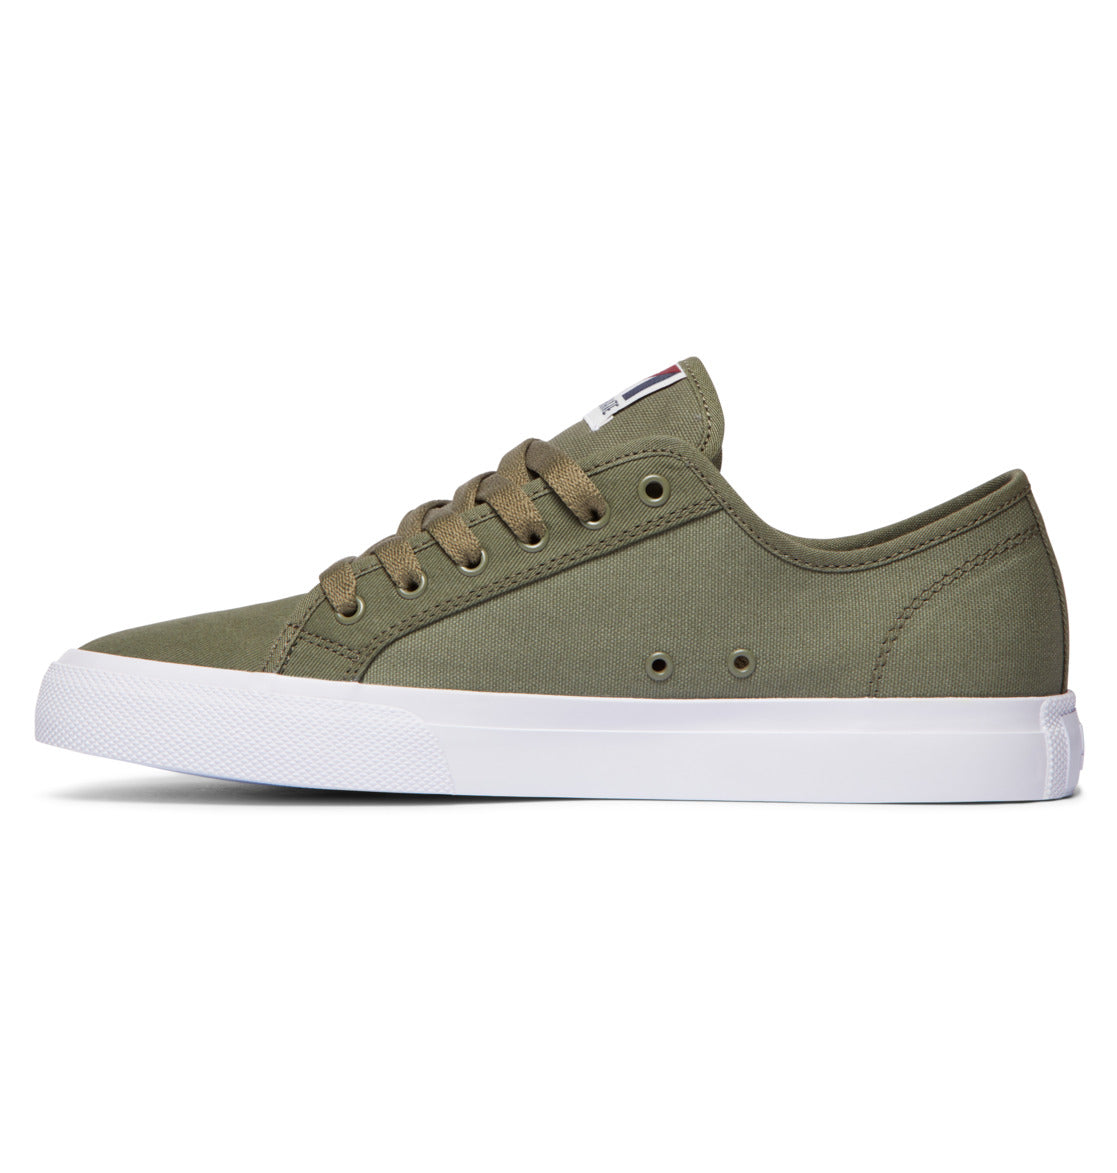 DC Manual Cuba Skate Canvas Shoes Army/Olive